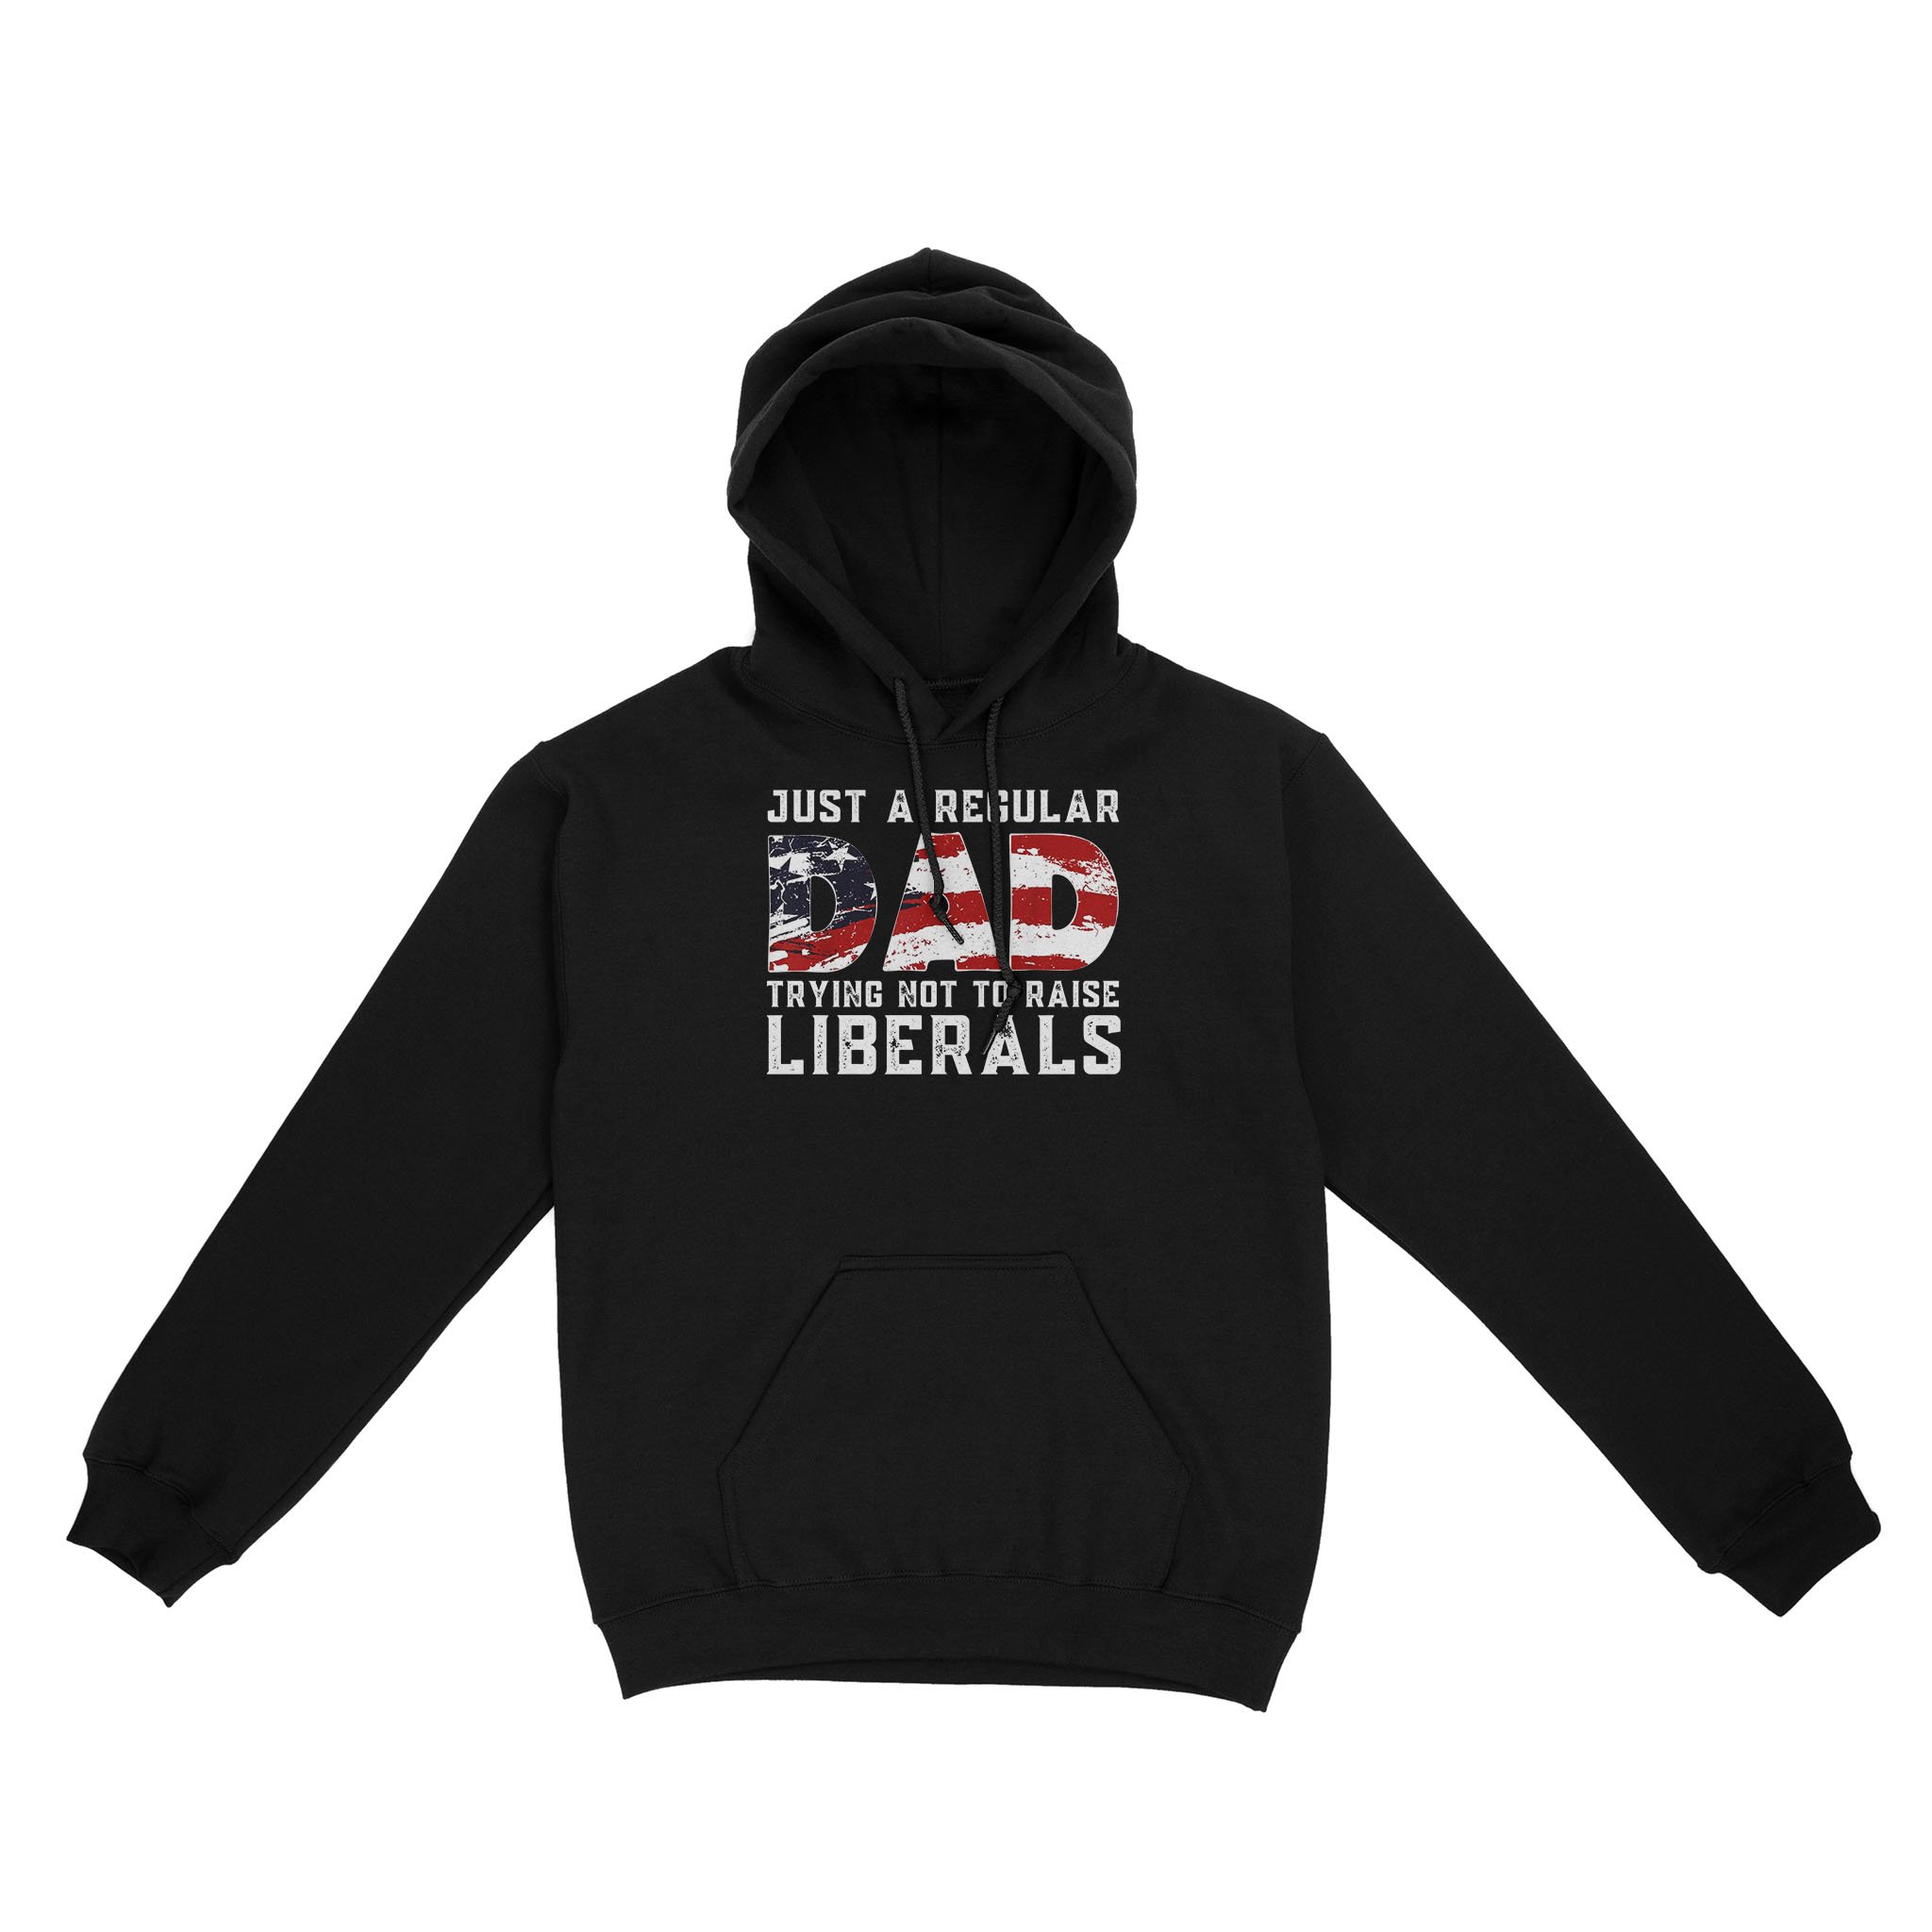 Republican Just A Regular Dad Trying Not To Raise Liberals Shirt Funny 4th of July Patriotic Vintage Gifts – Standard Hoodie